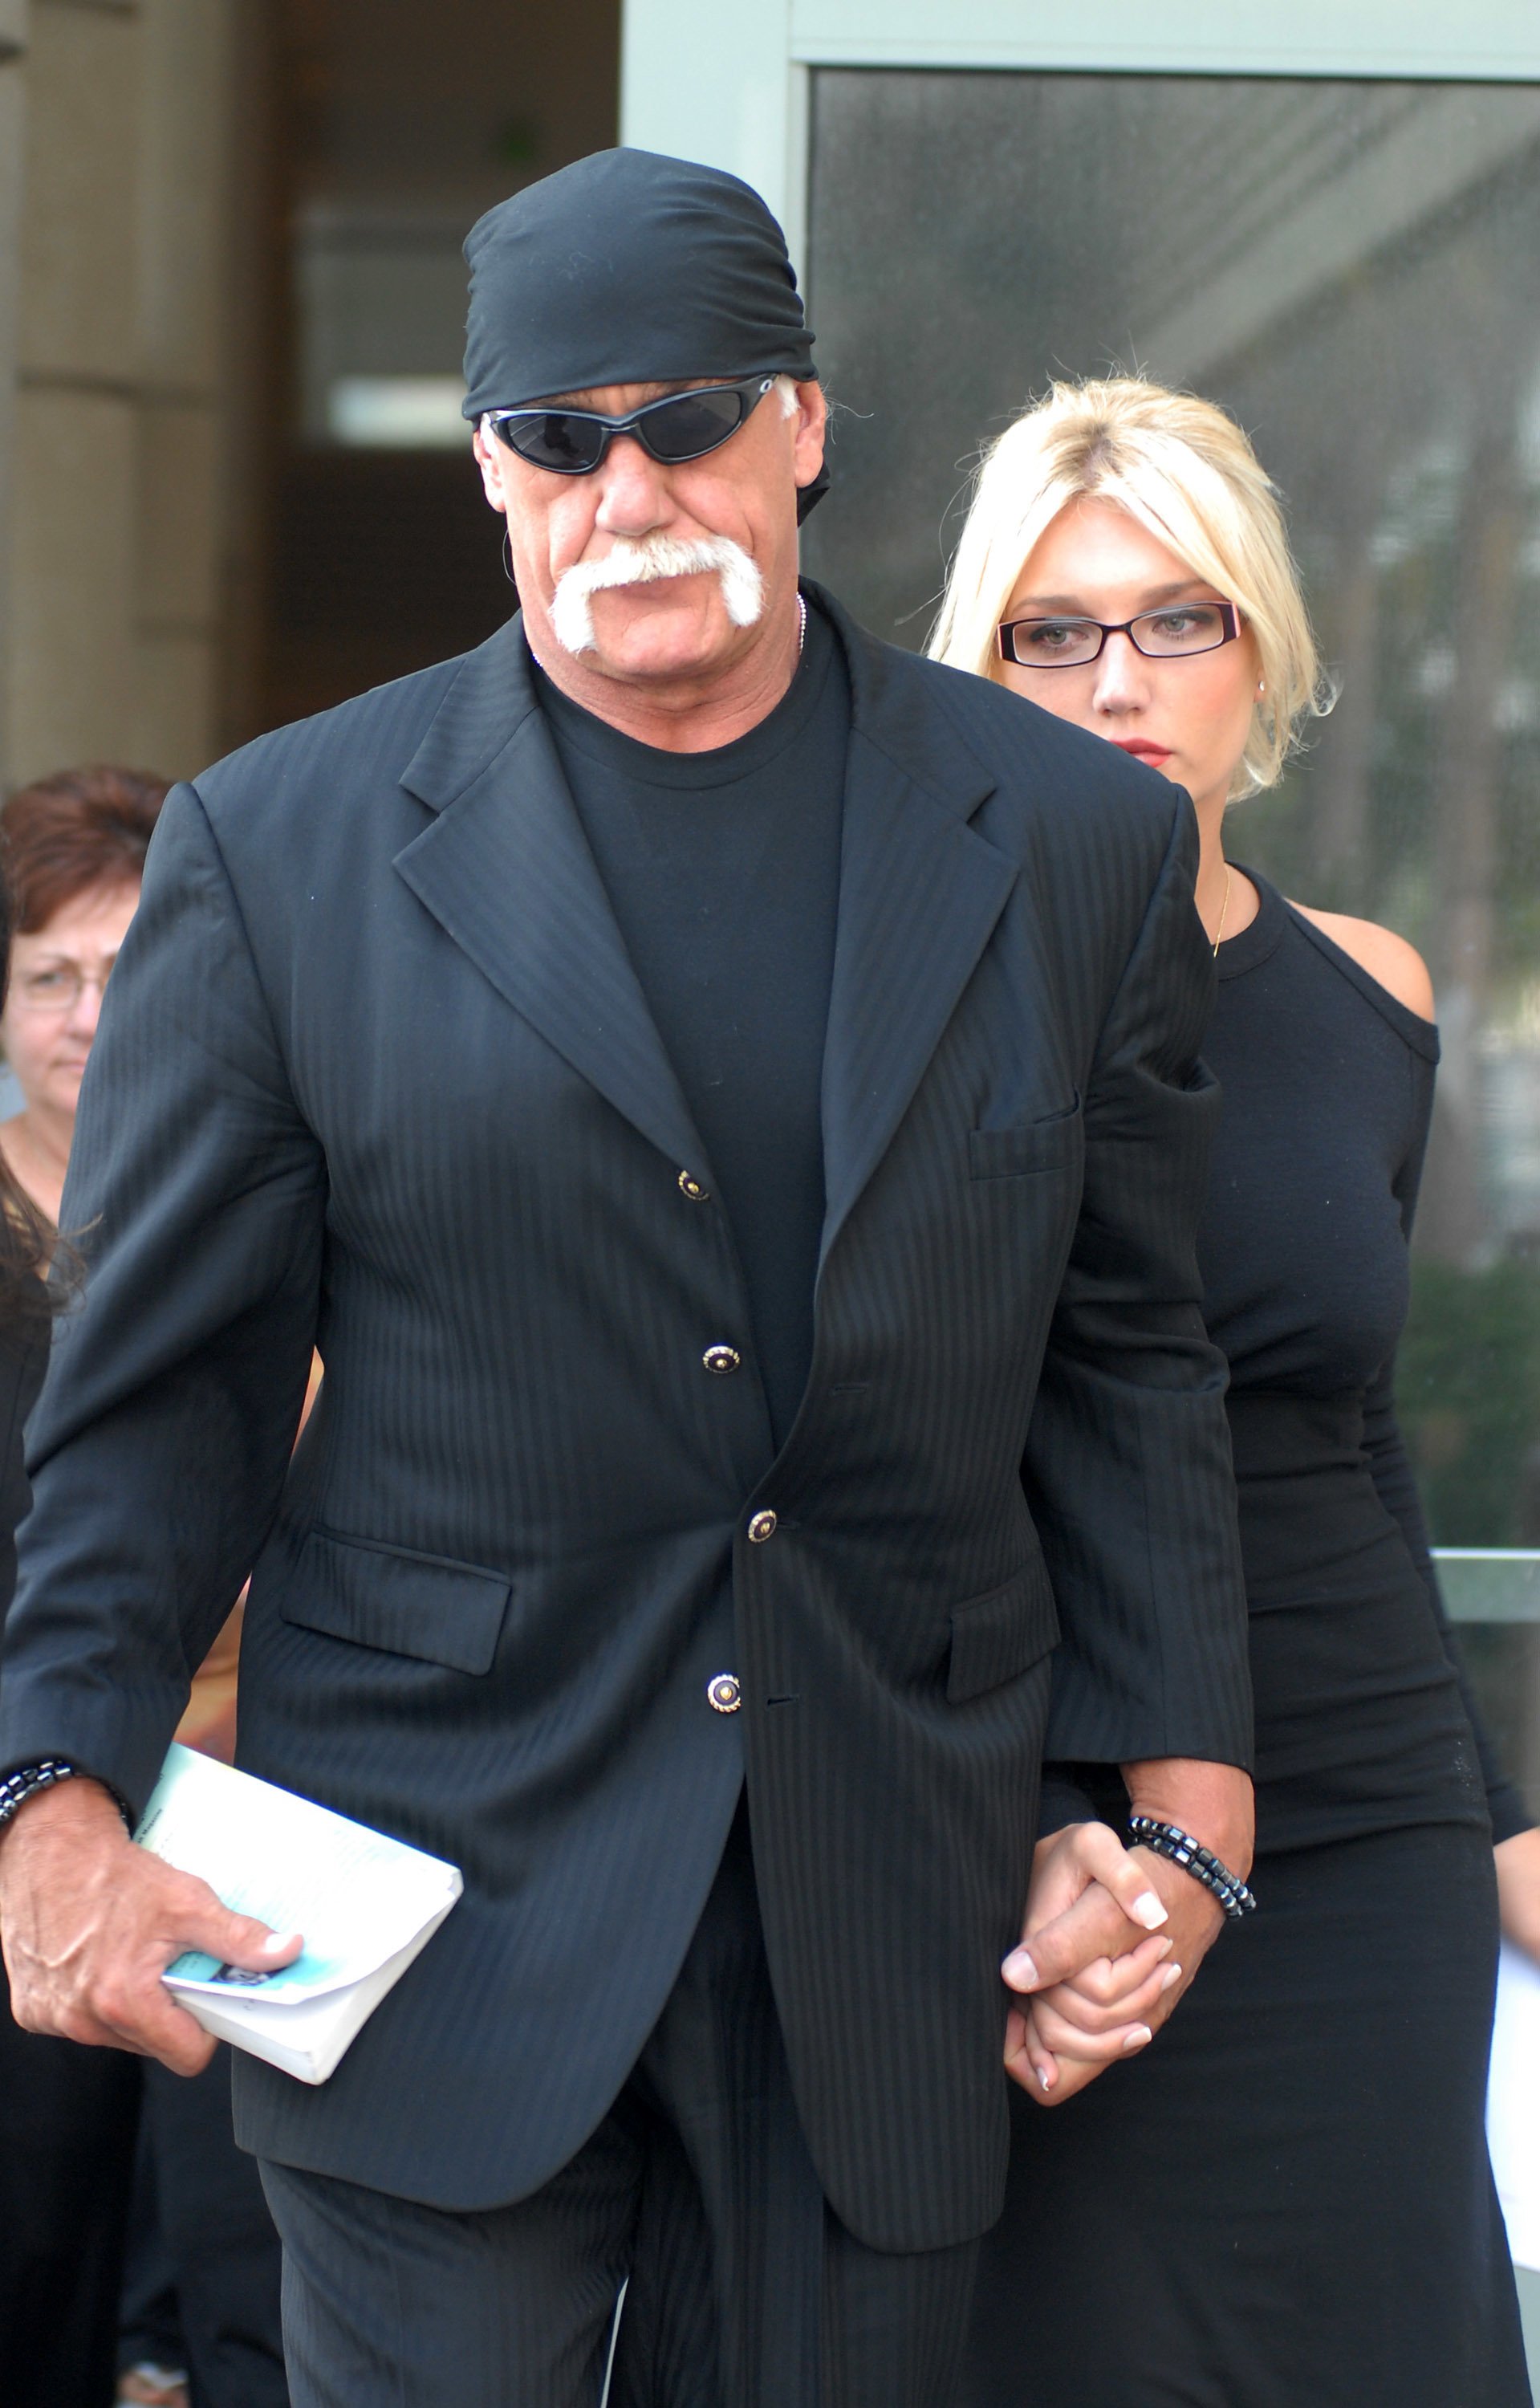 Hulk Hogan and daughter Brooke Hogan on May 9, 2008, in Clearwater, Florida | Photo: Tim Boyles/Getty Images